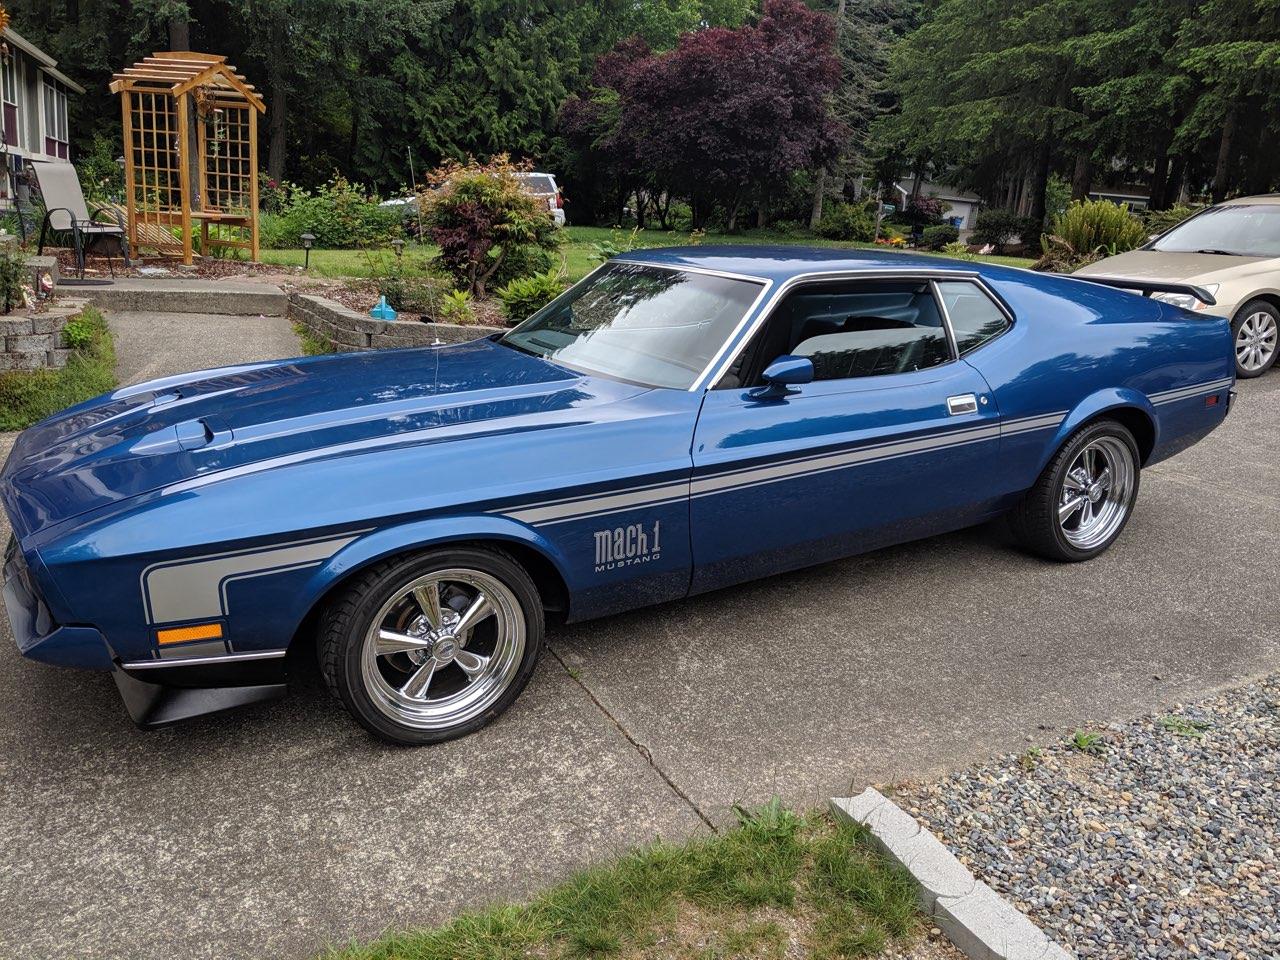 1972 Ford Mustang Mach 1 for Sale | ClassicCars.com | CC-1251957